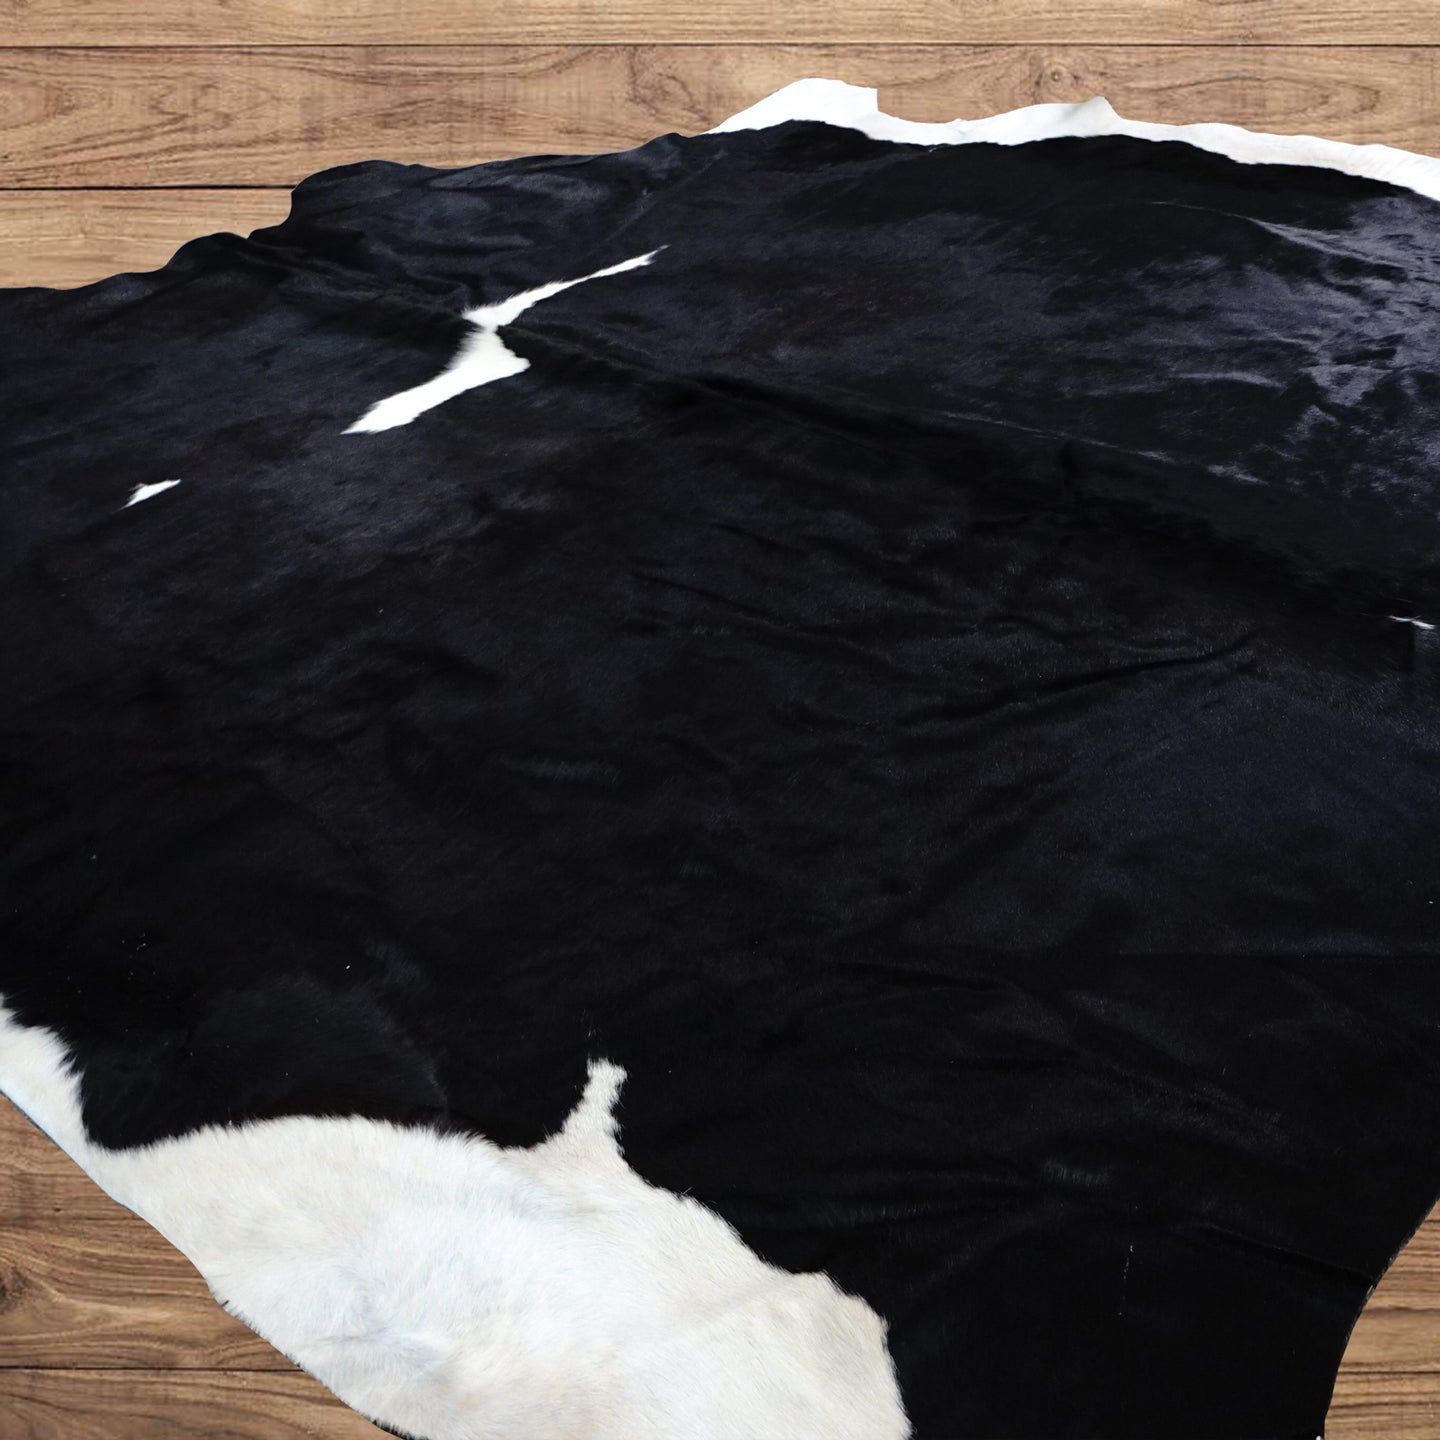 Large RODEO Black with white belly cowhide rug 6.7 x 6.9 ft -4173 - Rodeo Cowhide Rugs